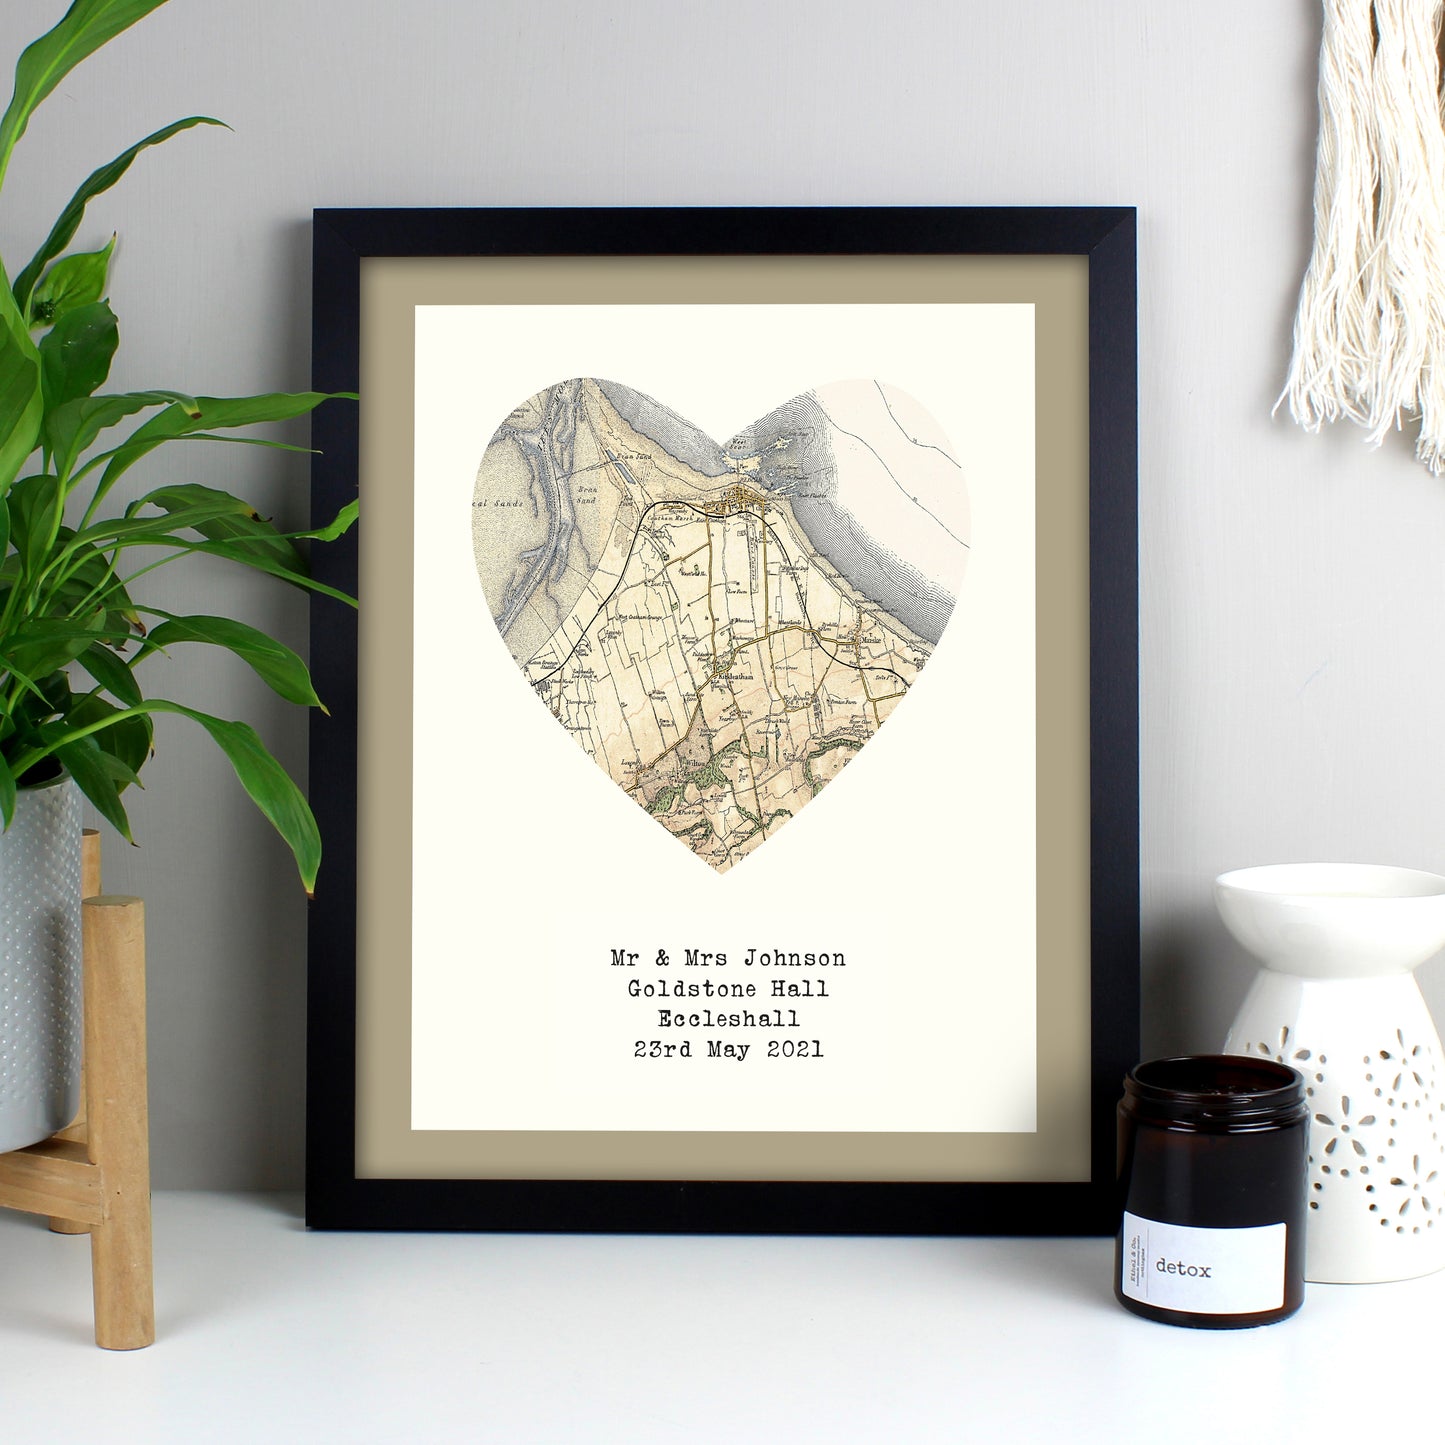 Personalised 1896 - 1904 Revised Map Heart Black Framed Print - Personalise It!